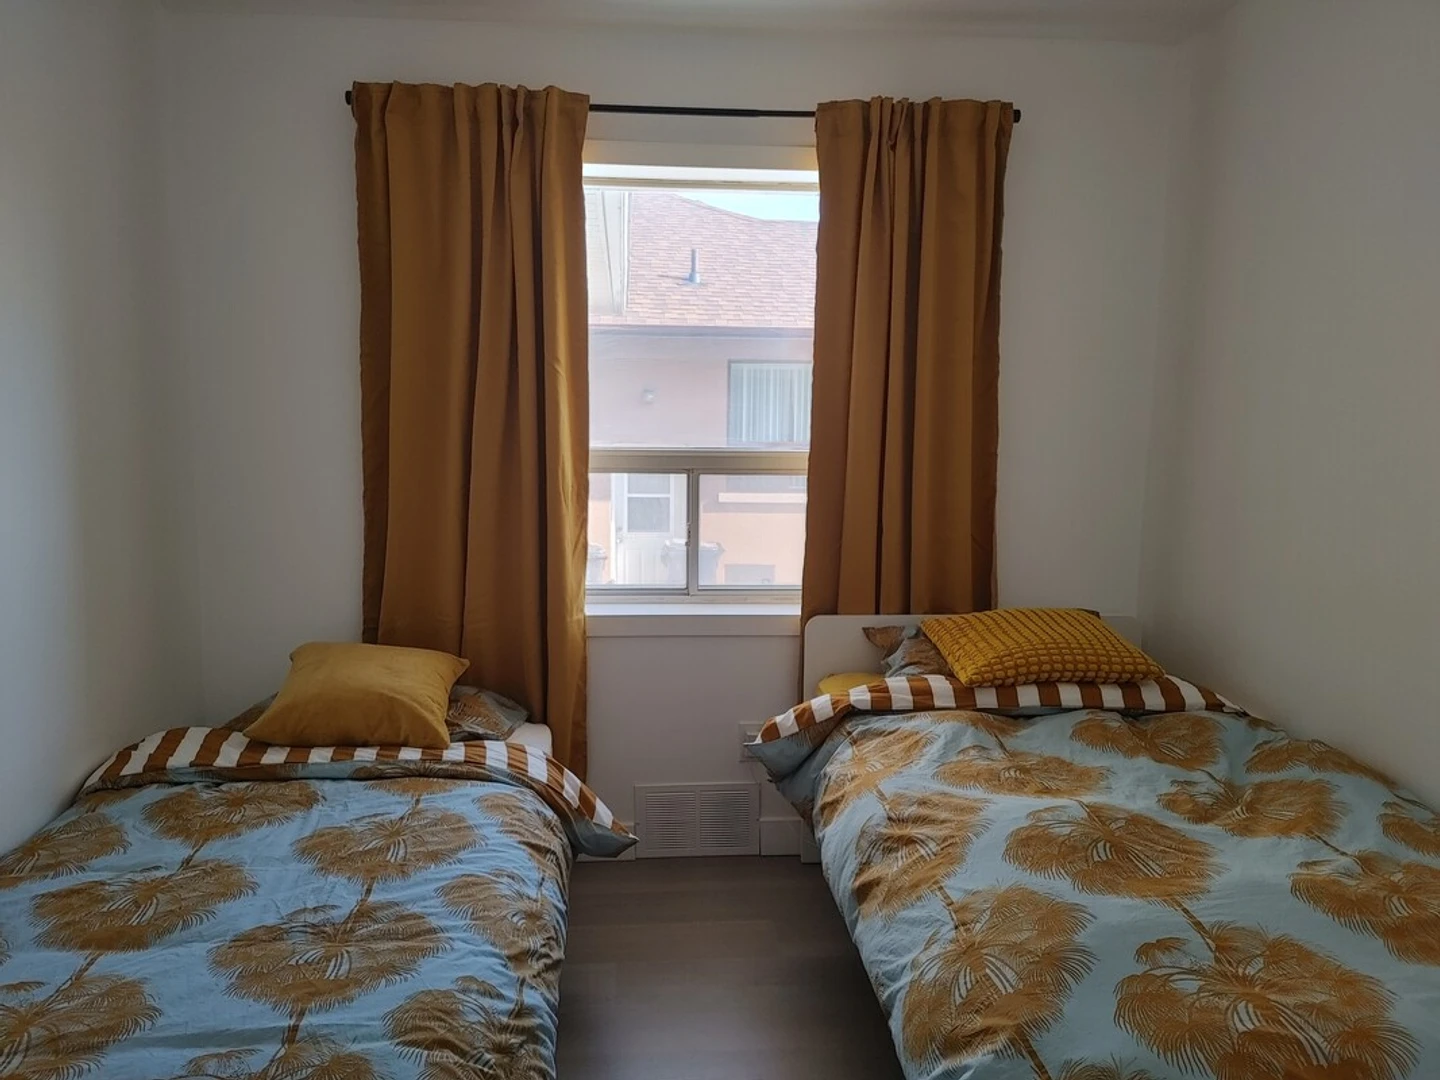 Cheap shared room in Toronto